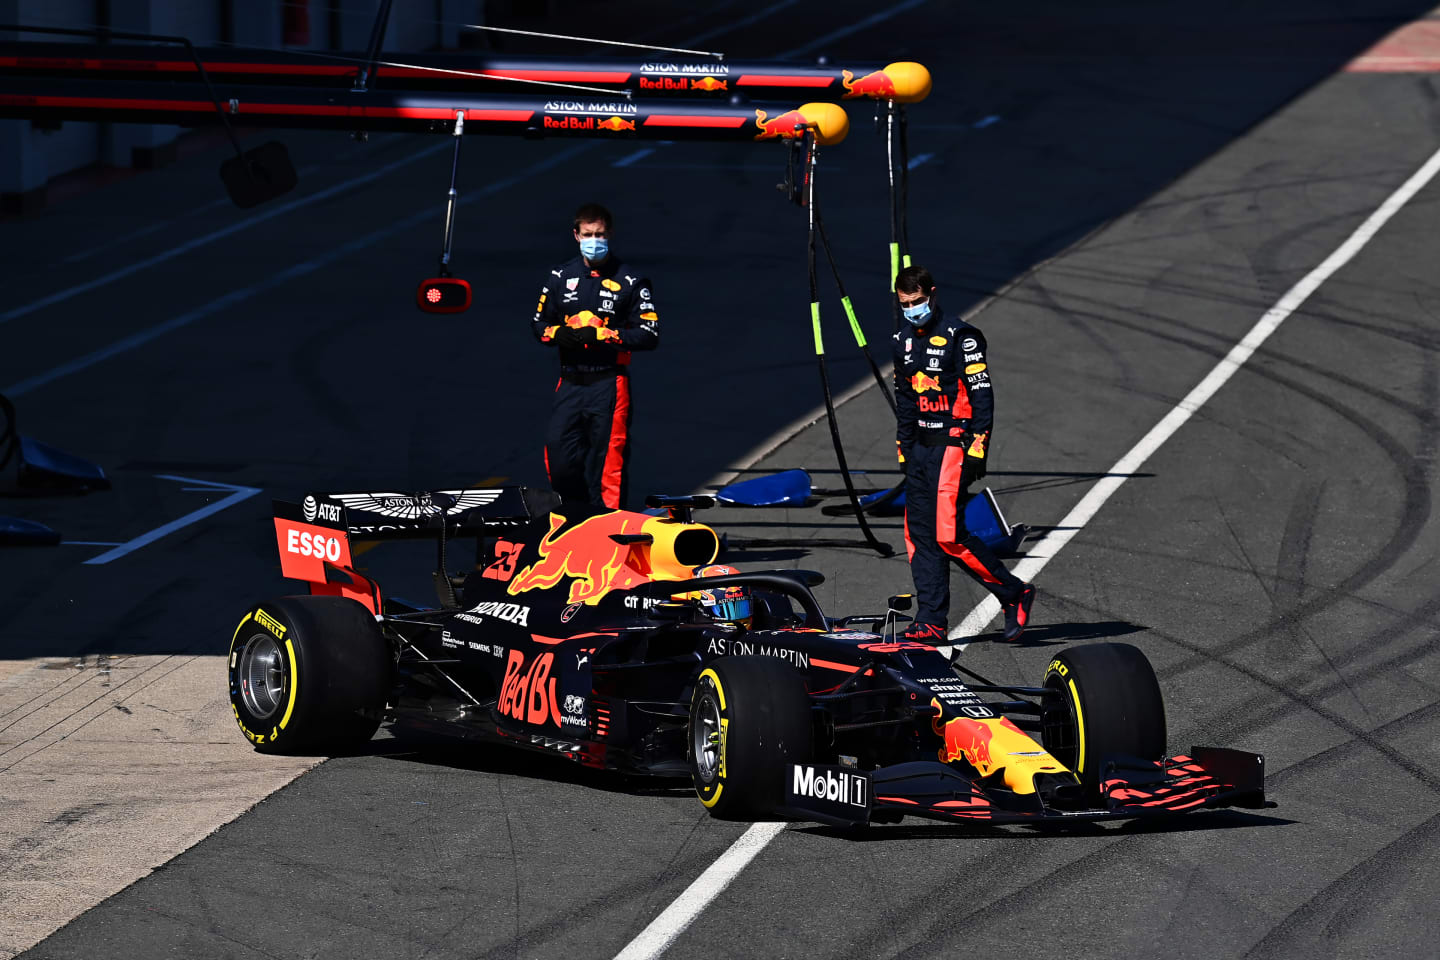 The Red Bull RB16 leaves the pits with Albon at the helm